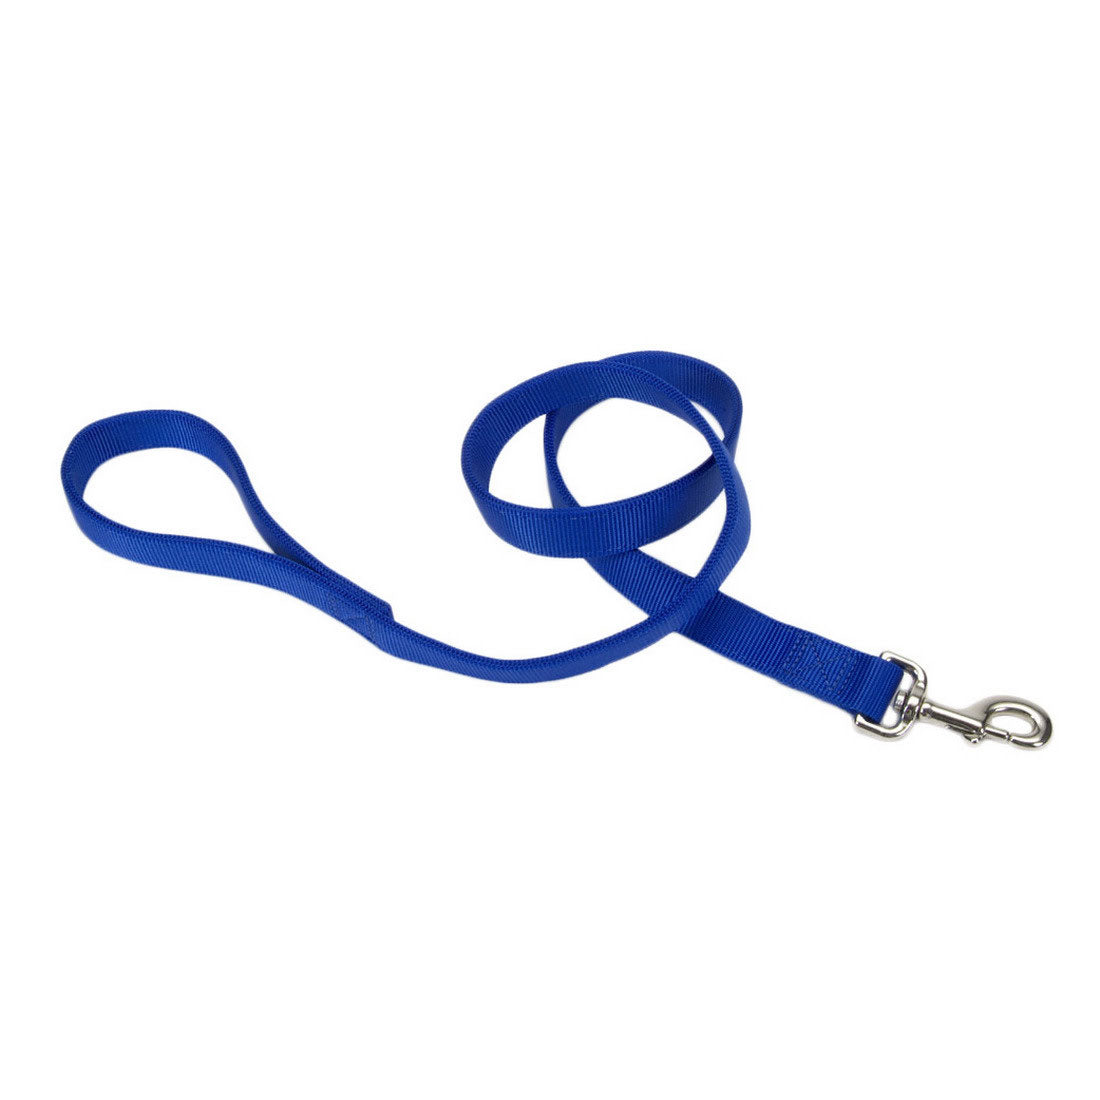 Coastal Pet Products, Coastal Pet Product Coastal Double-Ply Dog Leash